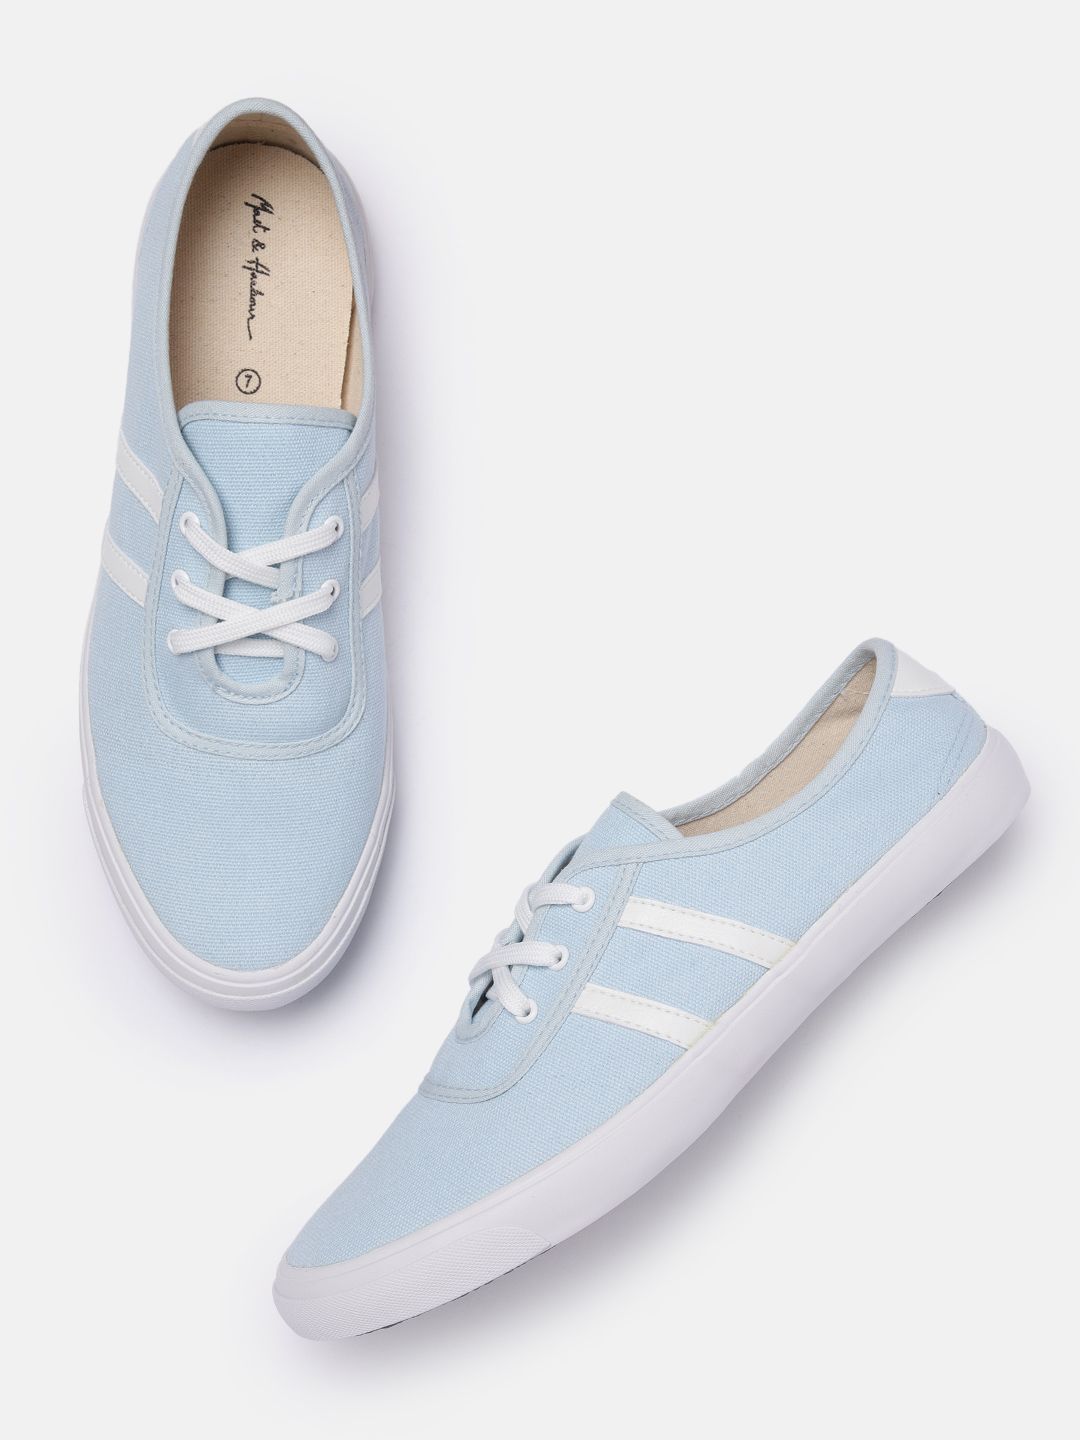 Mast & Harbour Women Blue Striped Sneakers Price in India